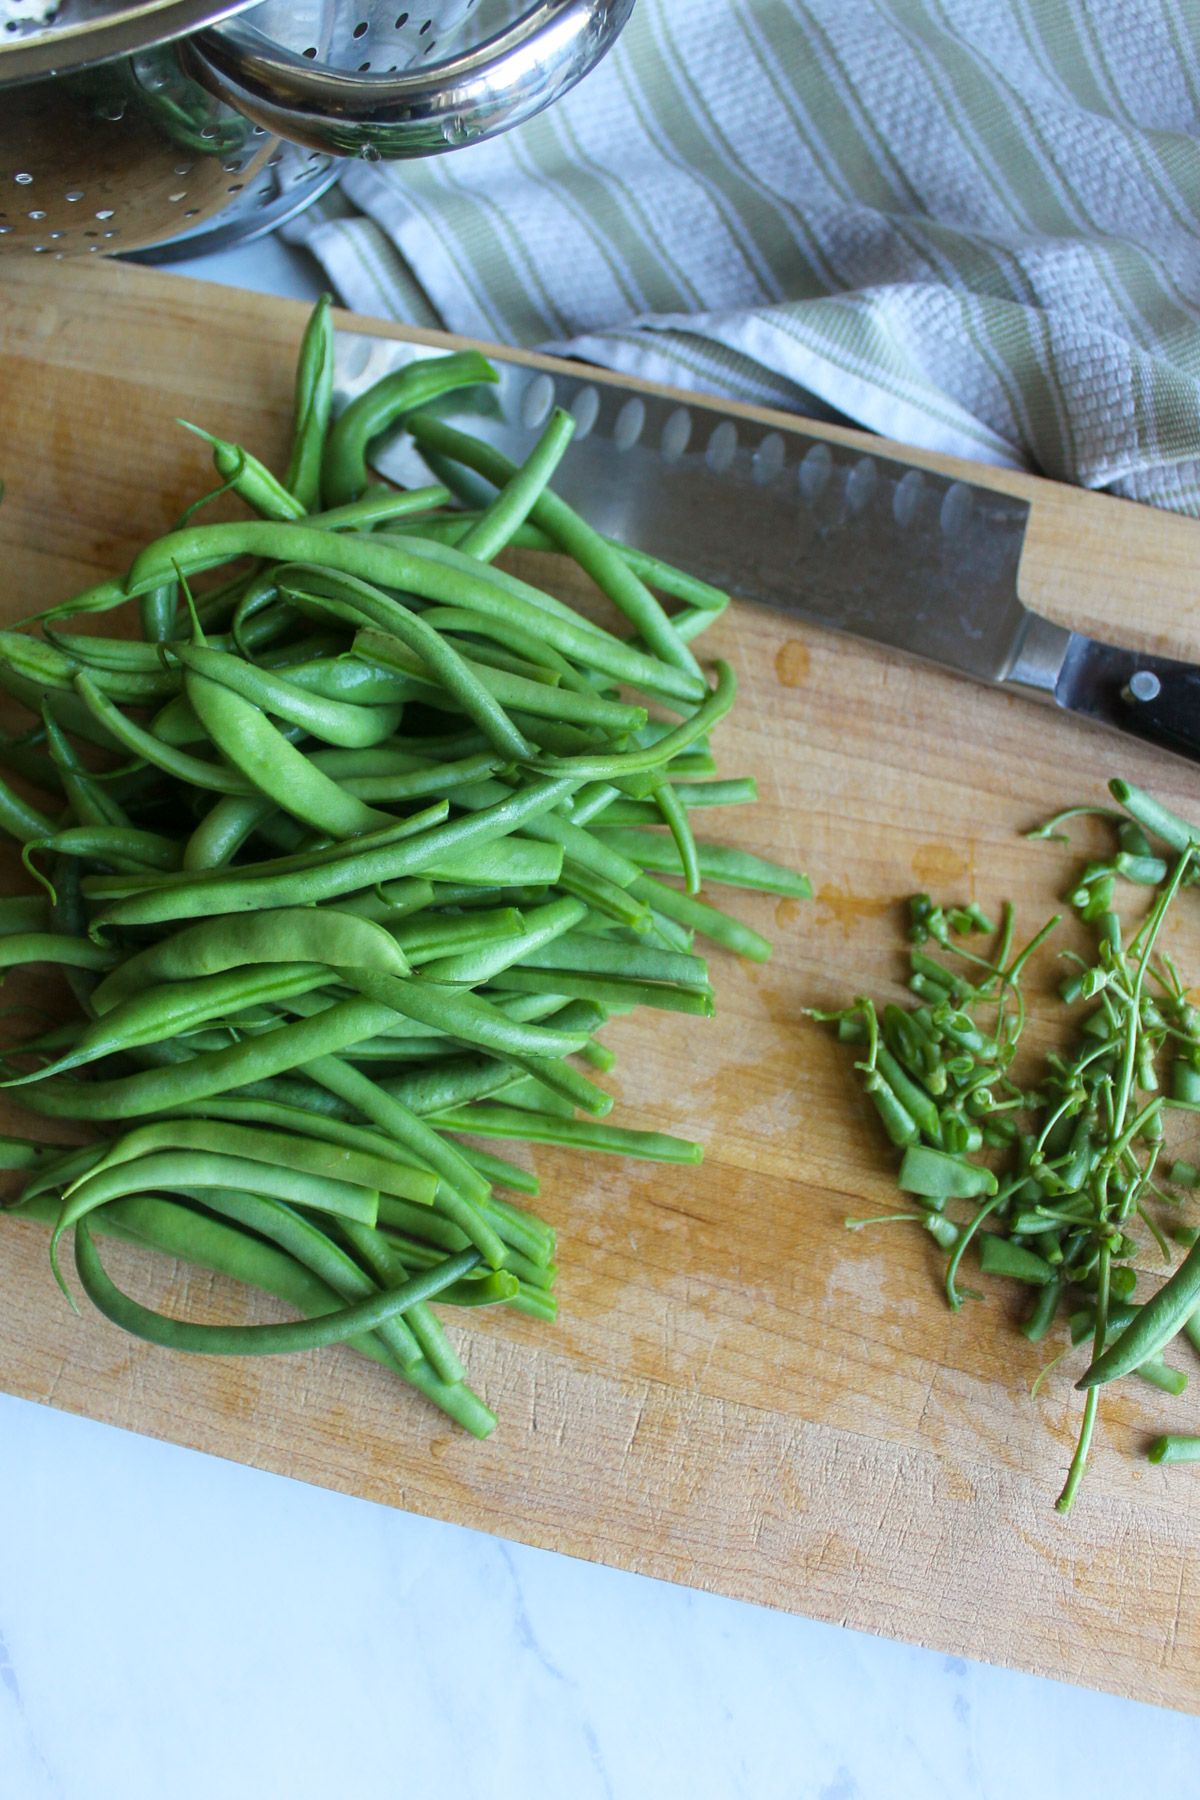 Raw green beans on a cutting board with the ends trimmed.